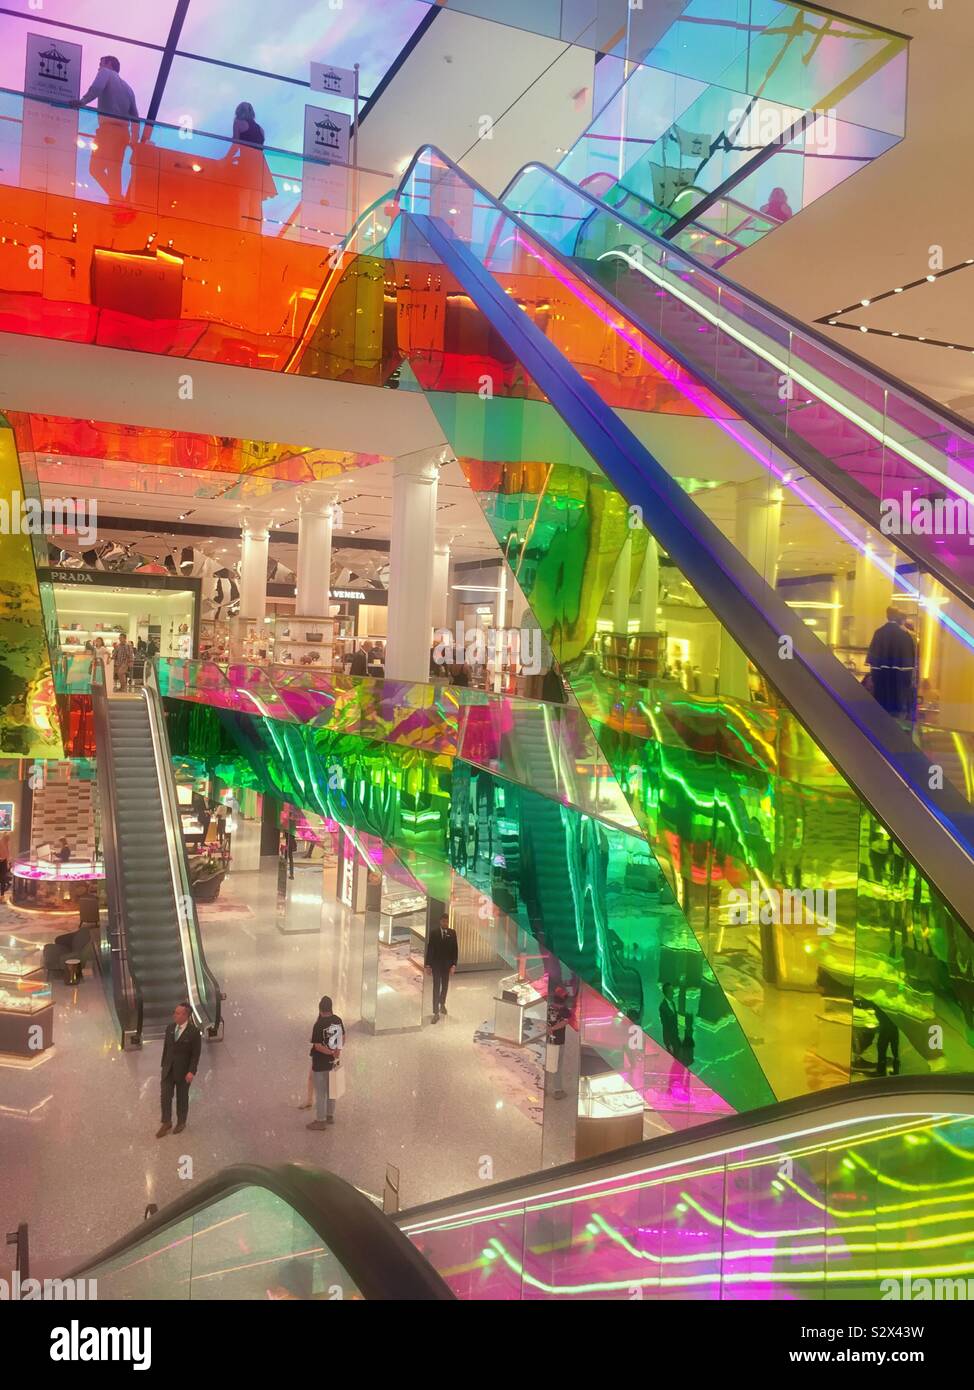 Remodeled Saks fifth avenue department store in Midtown Manhattan features  multi colored escalators on the first floor, NYC, USA Stock Photo - Alamy